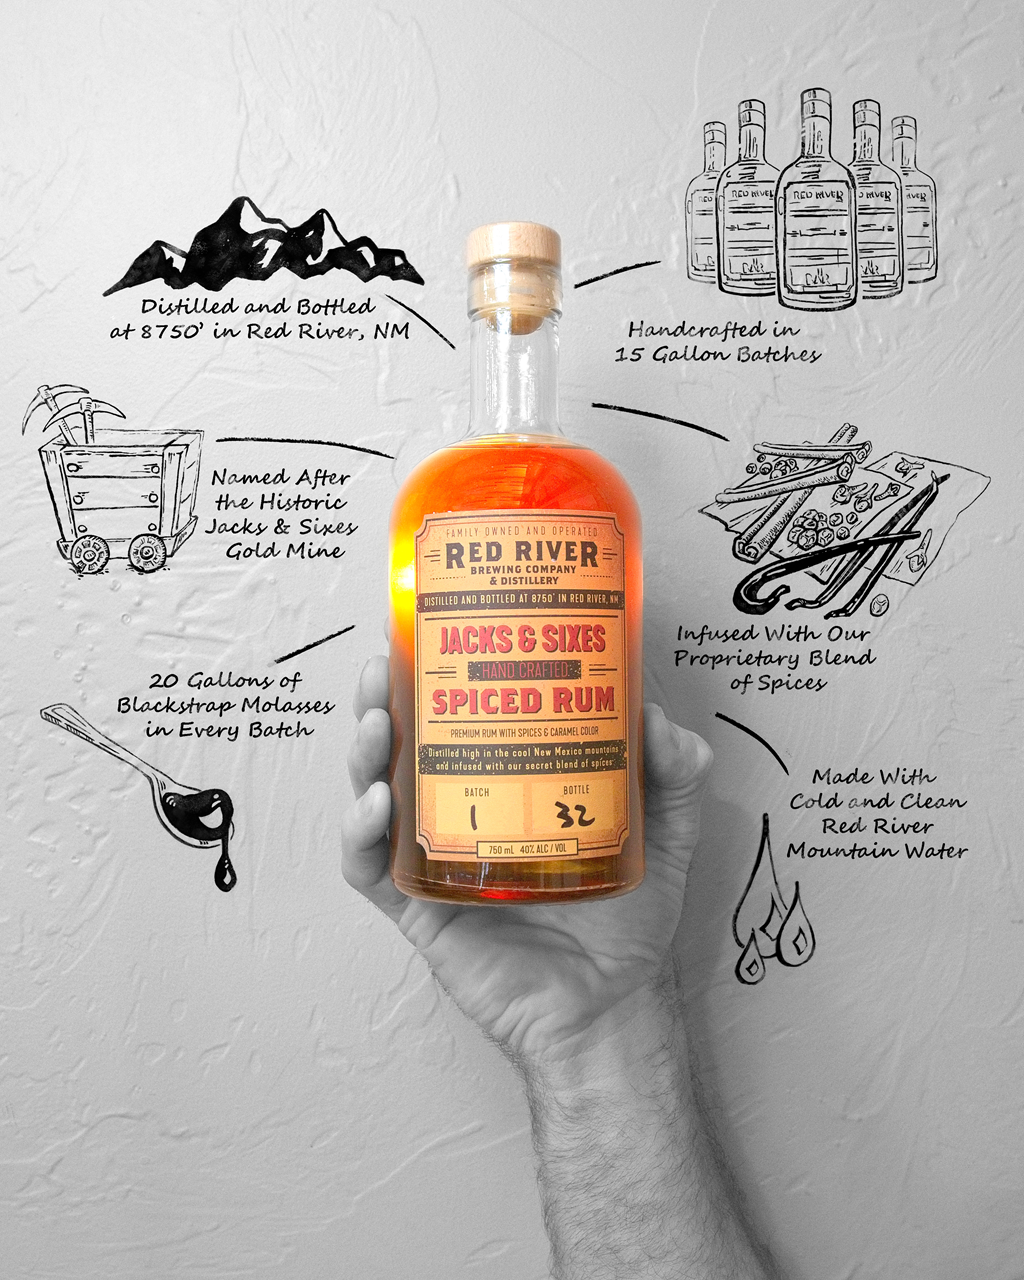 Red River Brewery & Distillery - Spirits, Jacks and Sixes Spiced Rum